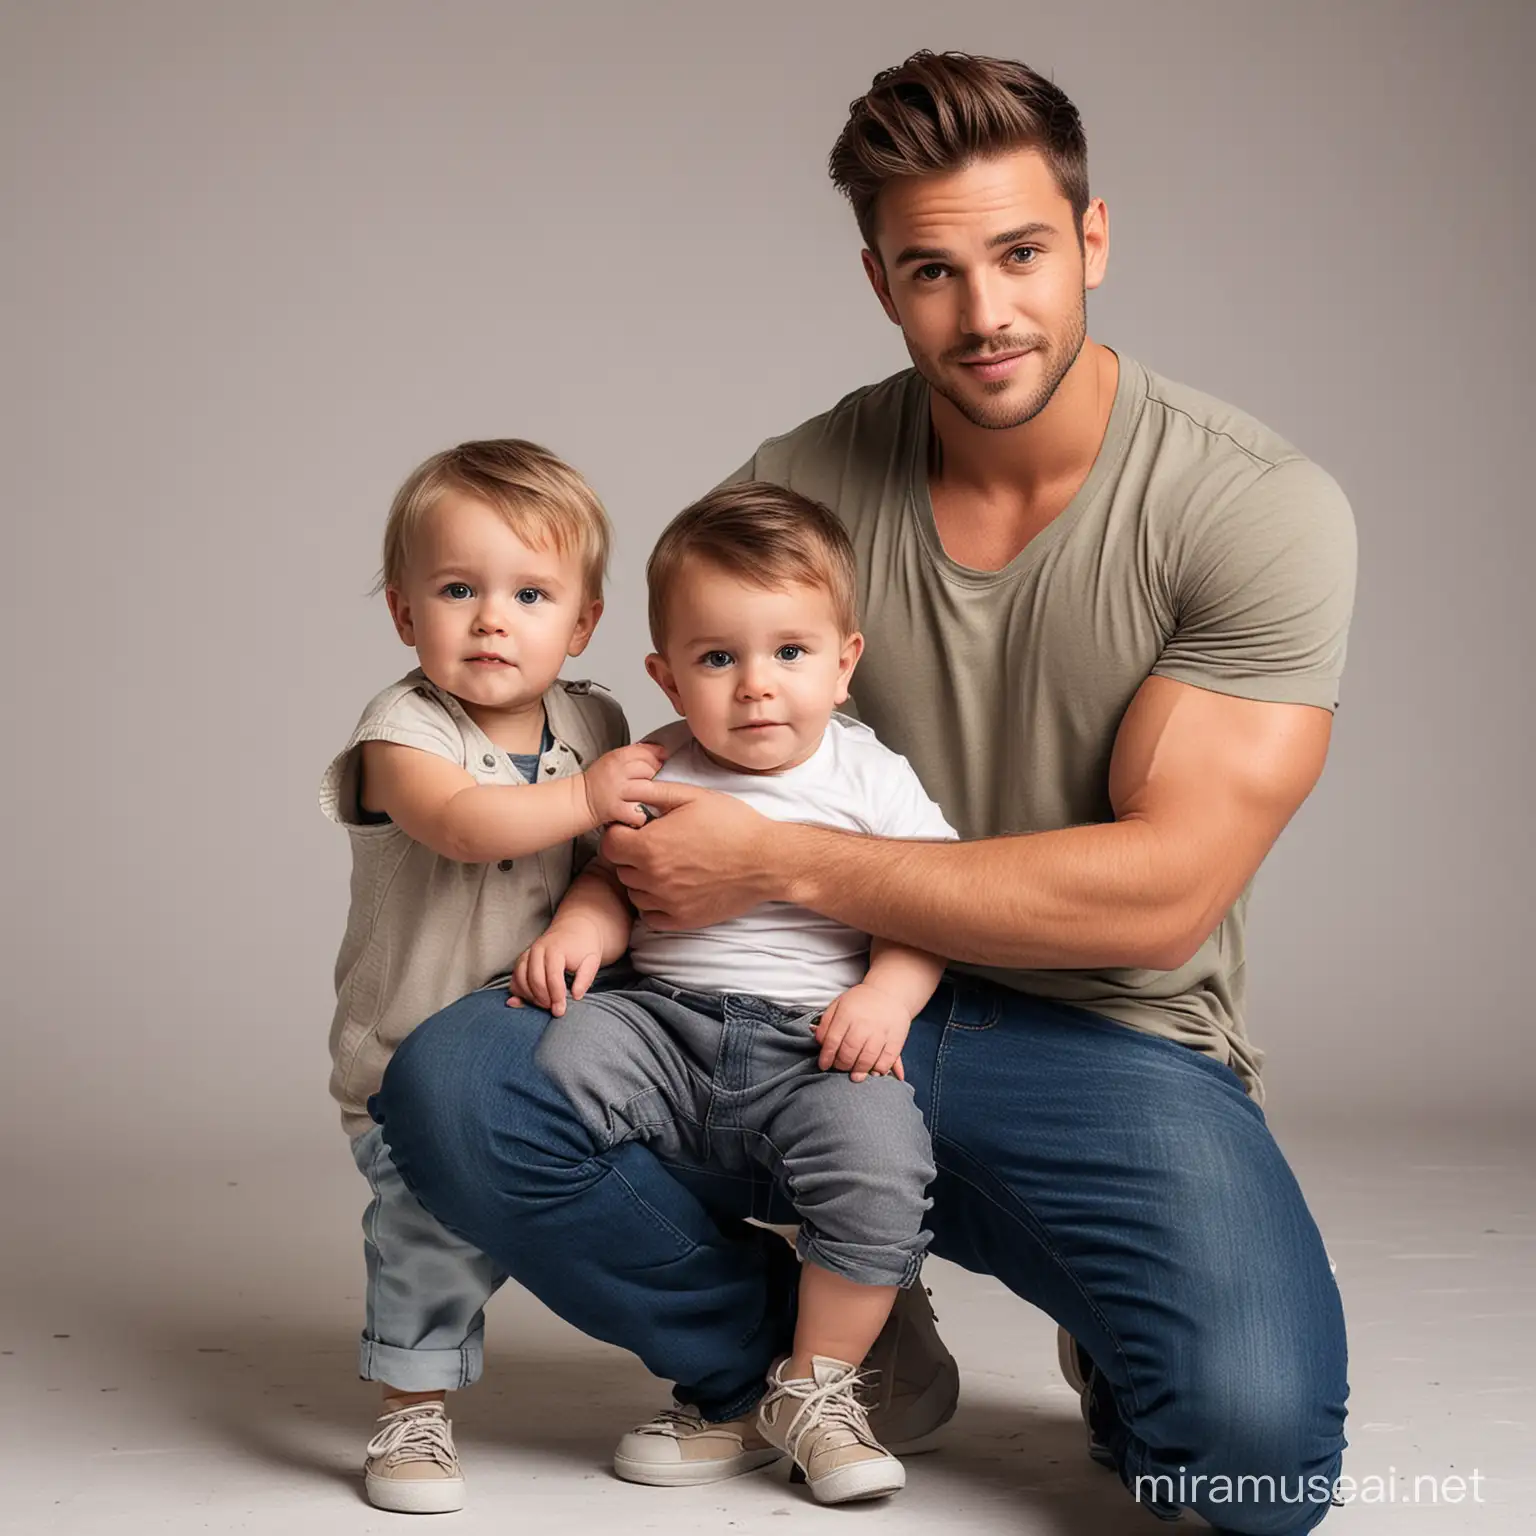 A young attractive male celebrity doing a photoshoot with his son whos a toddler.